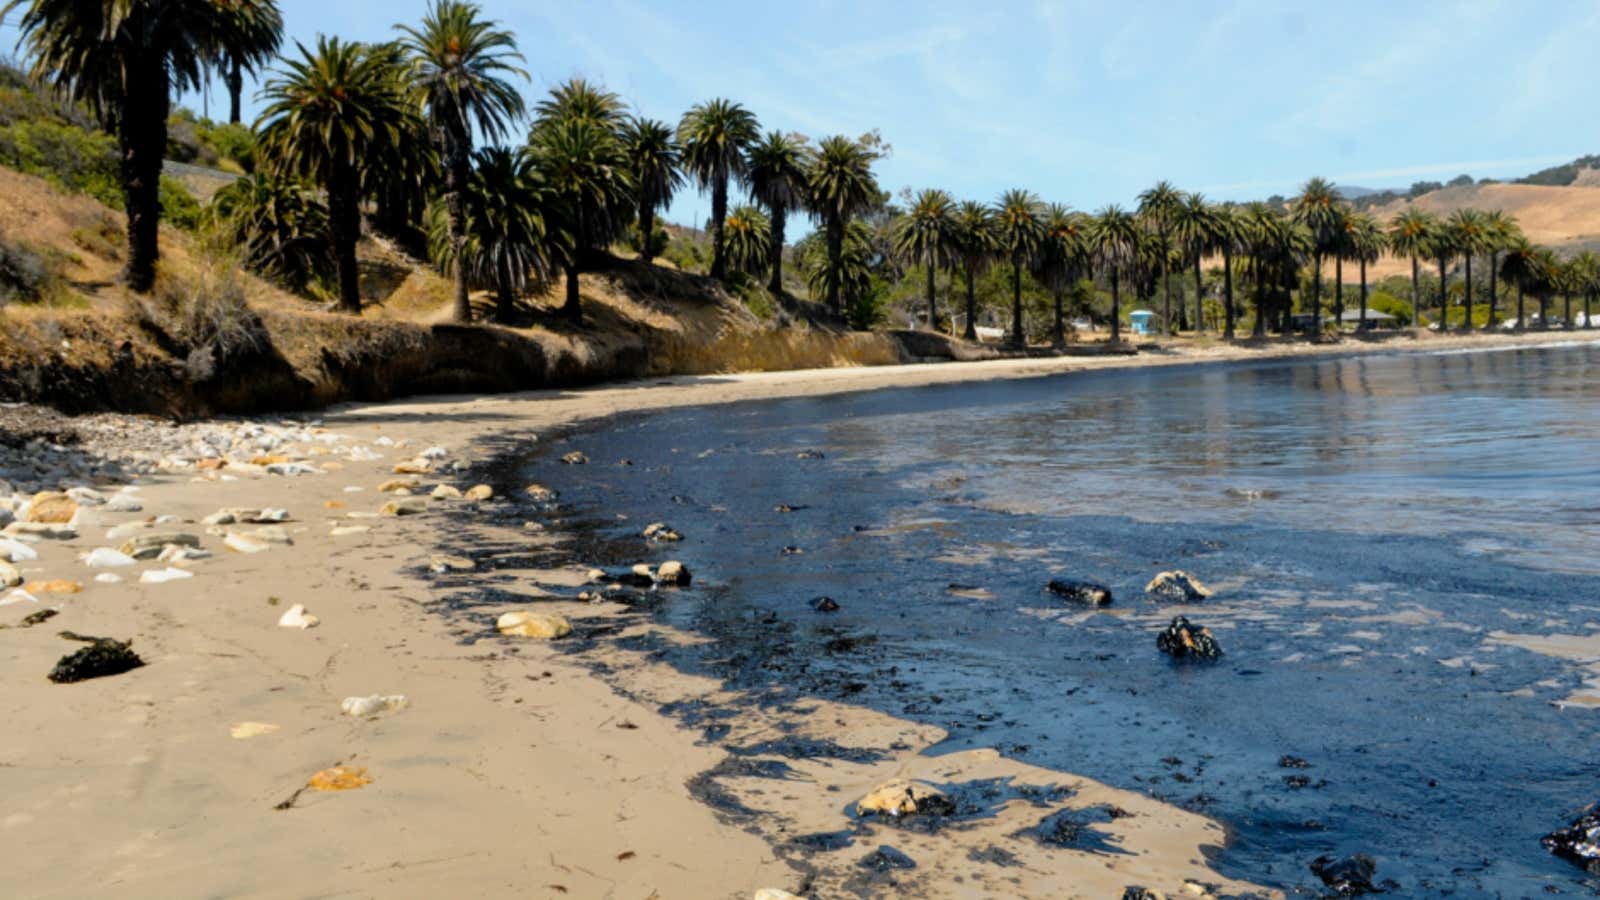 Photos: A ruptured pipeline dumped 21,000 gallons of oil on the California coastline